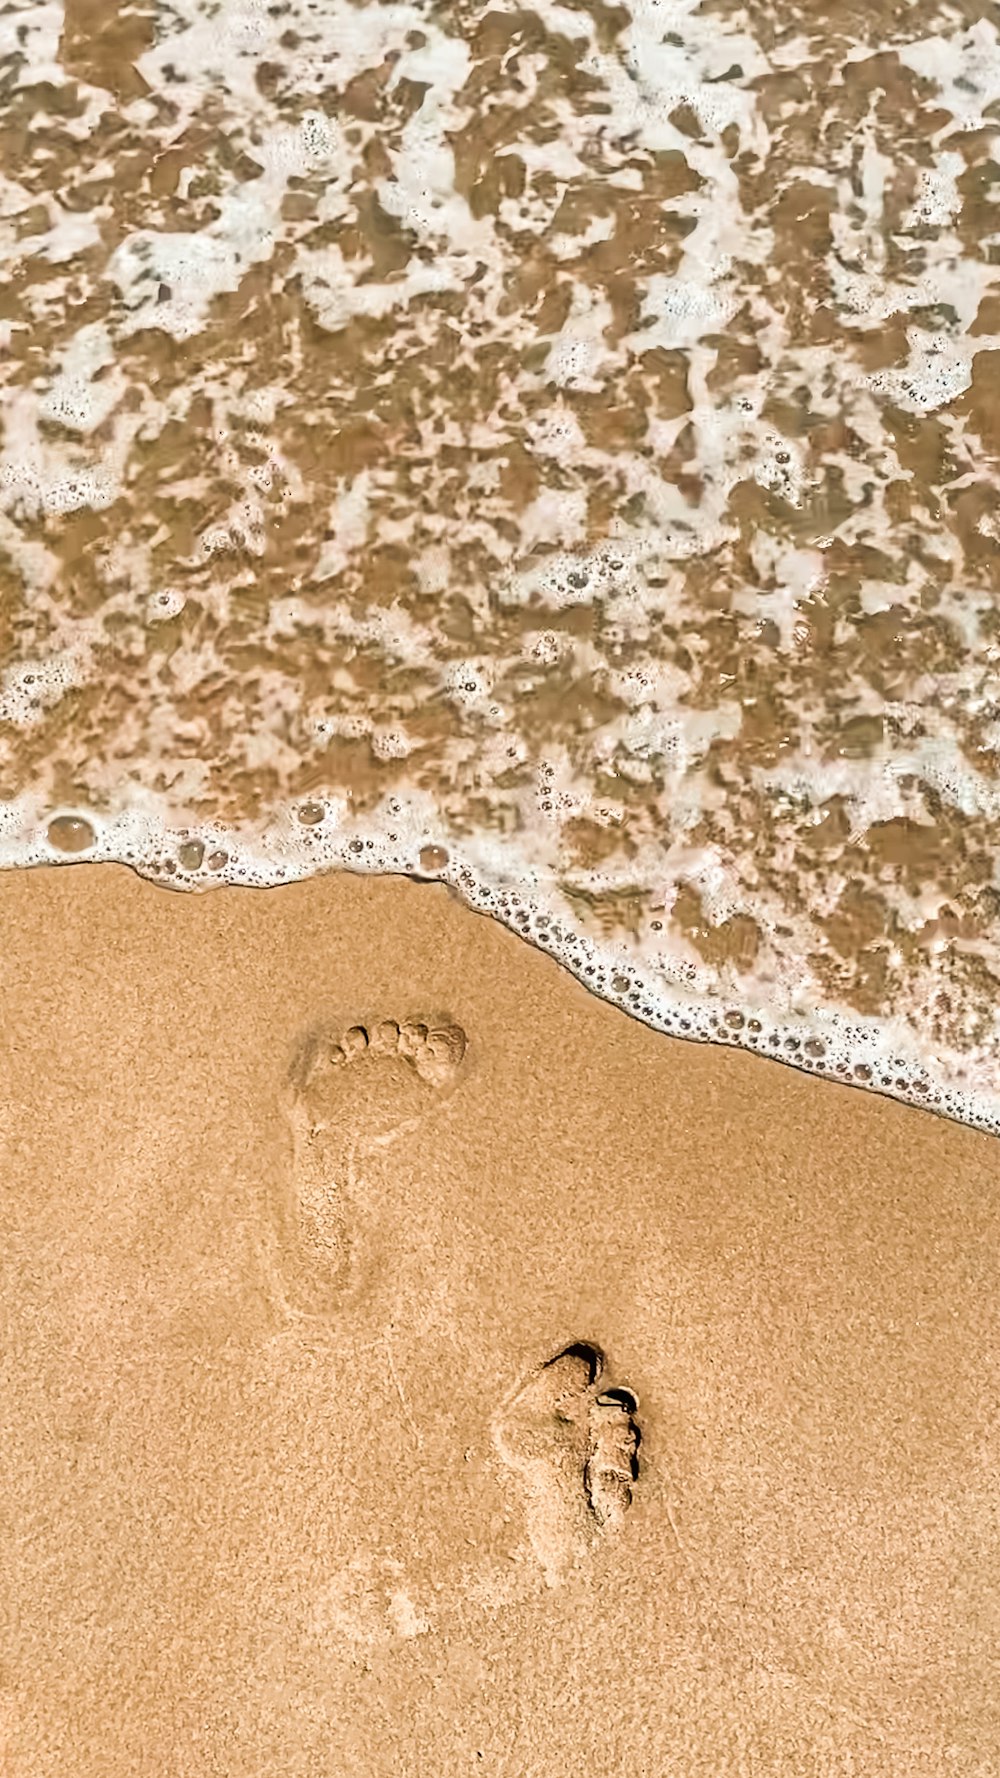 a person's footprints in the sand next to the ocean